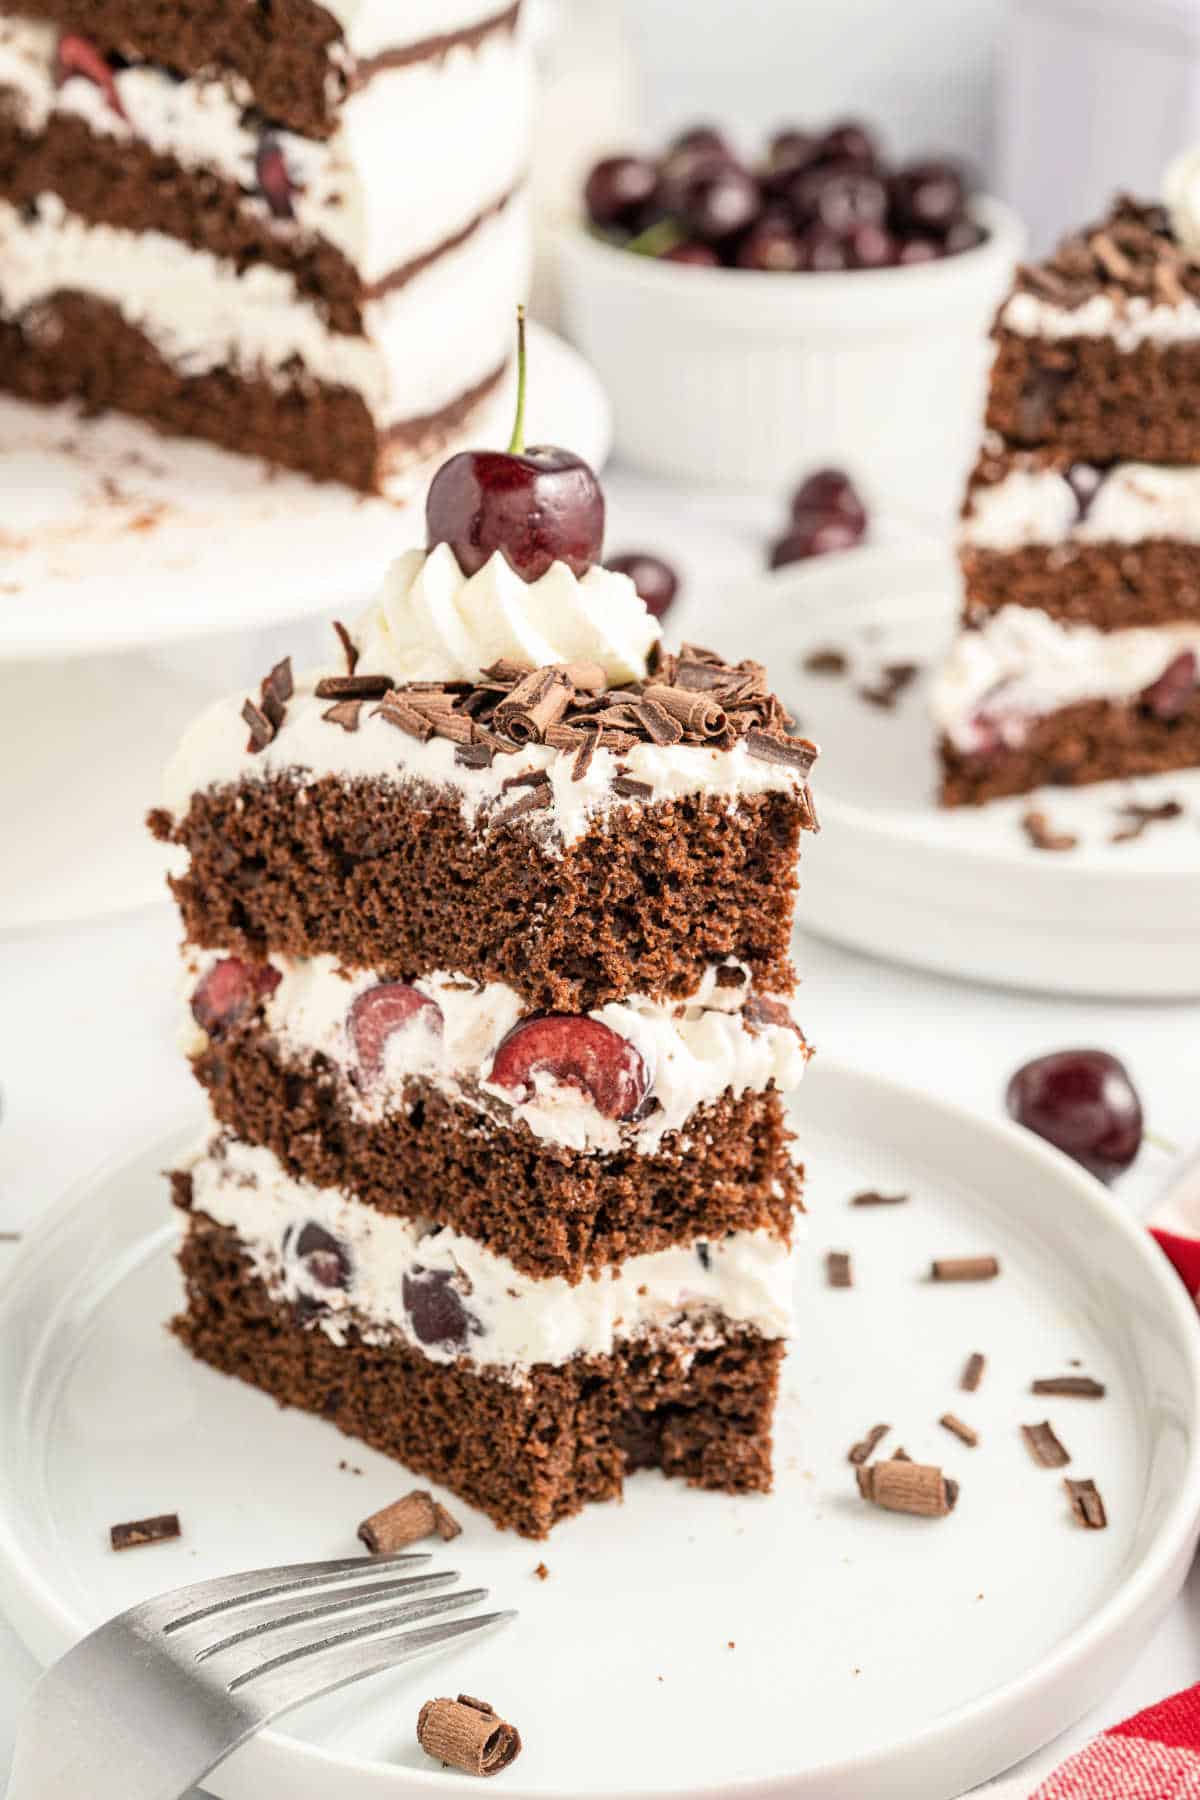 Slice of black forest cake with a bite taken out.